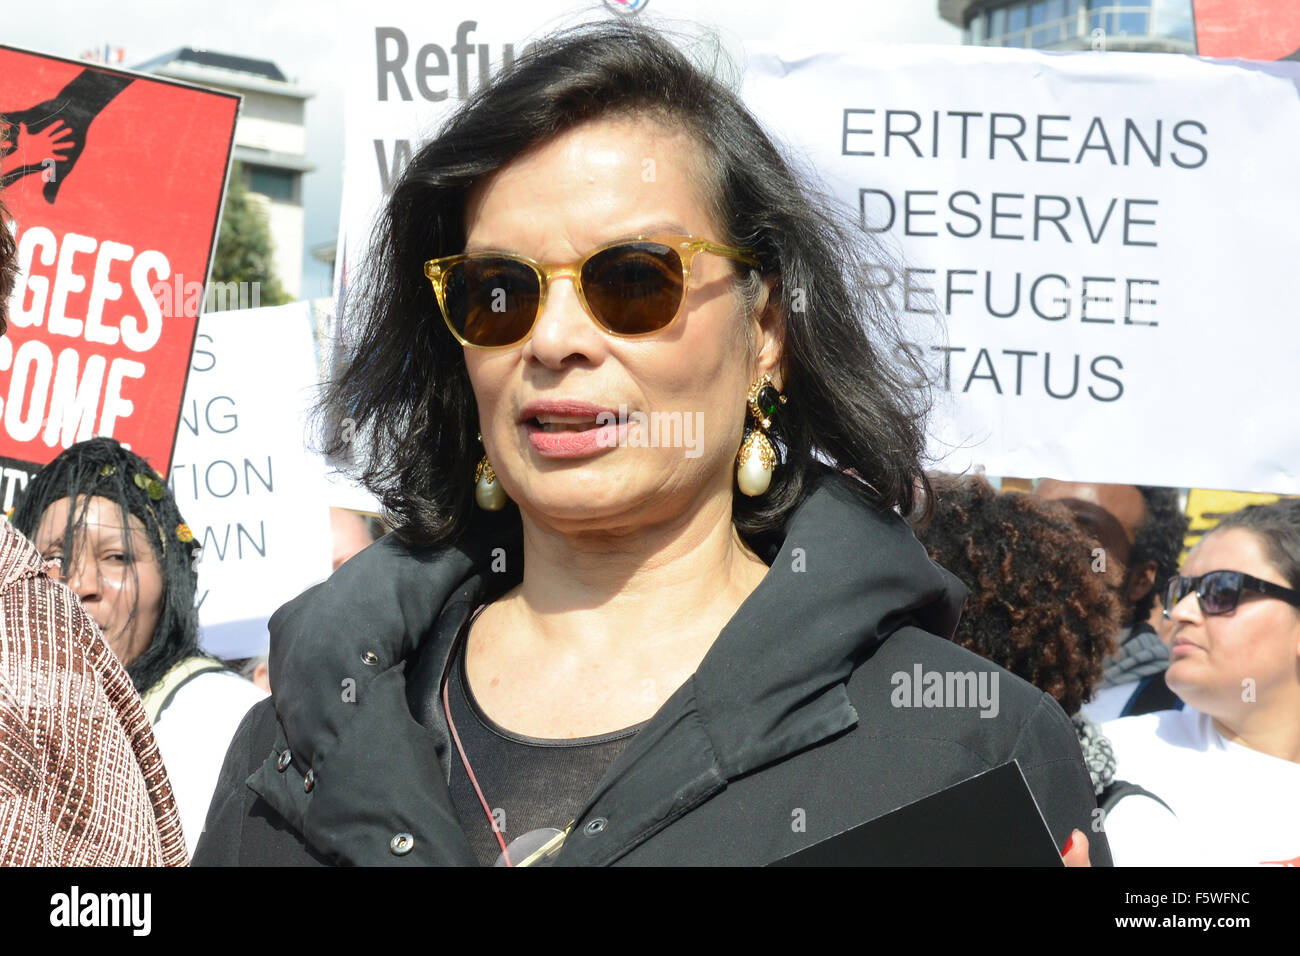 Bianca Jagger joins a national day of action called by various political campaign groups to show solidarity with refugees.  Featuring: Bianca Jagger Where: London, United Kingdom When: 12 Sep 2015 Stock Photo